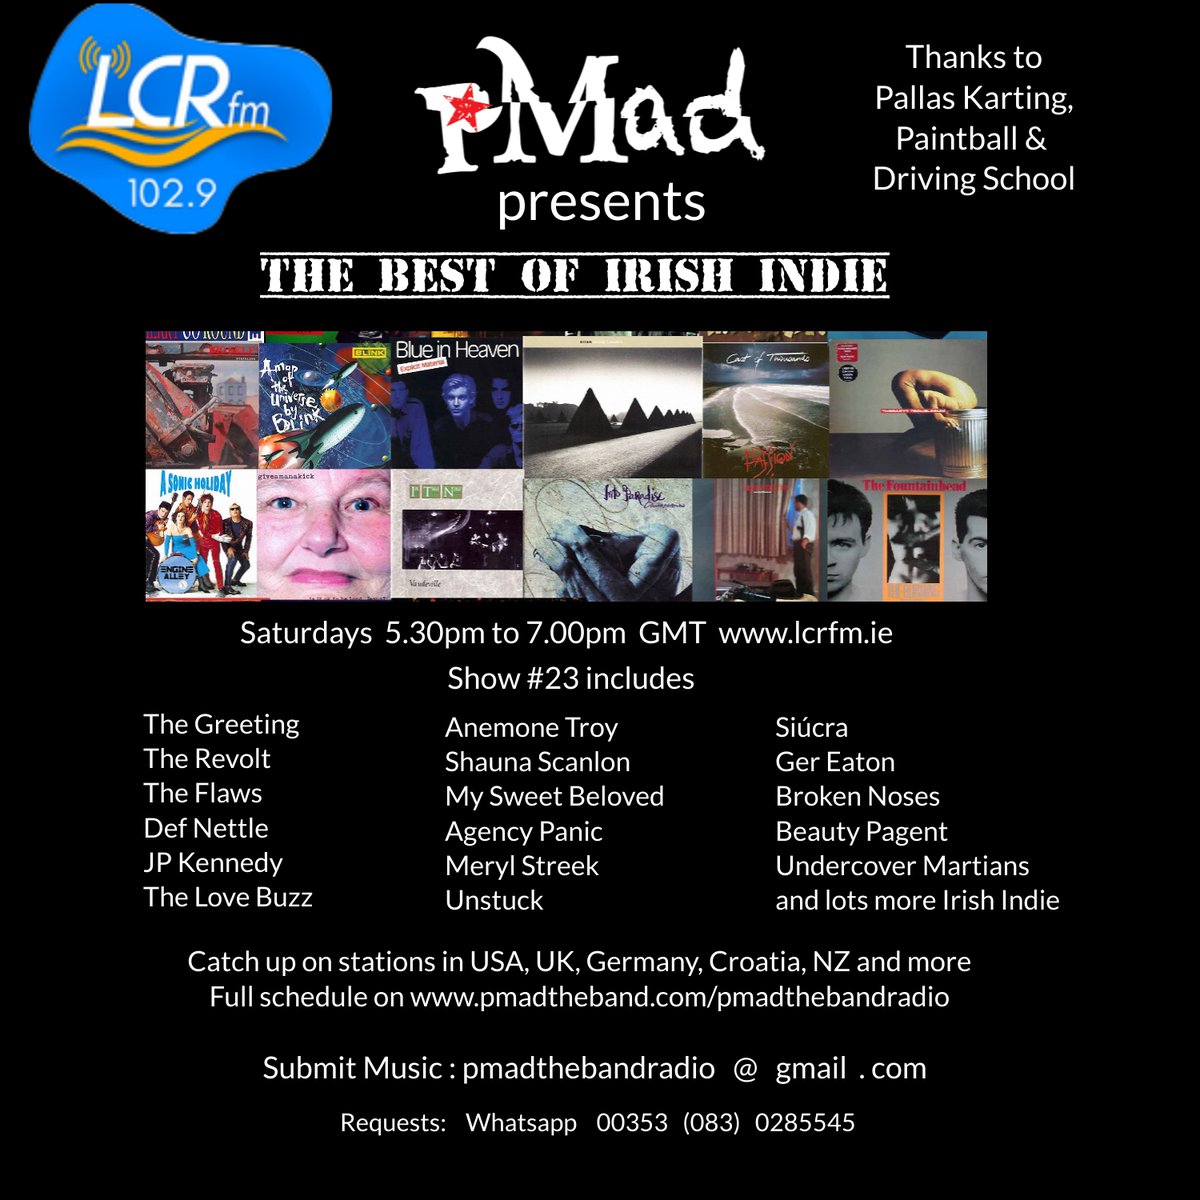 Featured this week: @ThegreetingB #siucra @eaton_ger #Skindive #beautypageant #brokennoses @AnemoneTroy @mysweetbelovedx @TheLoveBuzz1 @JPKMUSIK @DefNettleBand @theflaws & lots more best of irish indie Live on lcrfm.ie